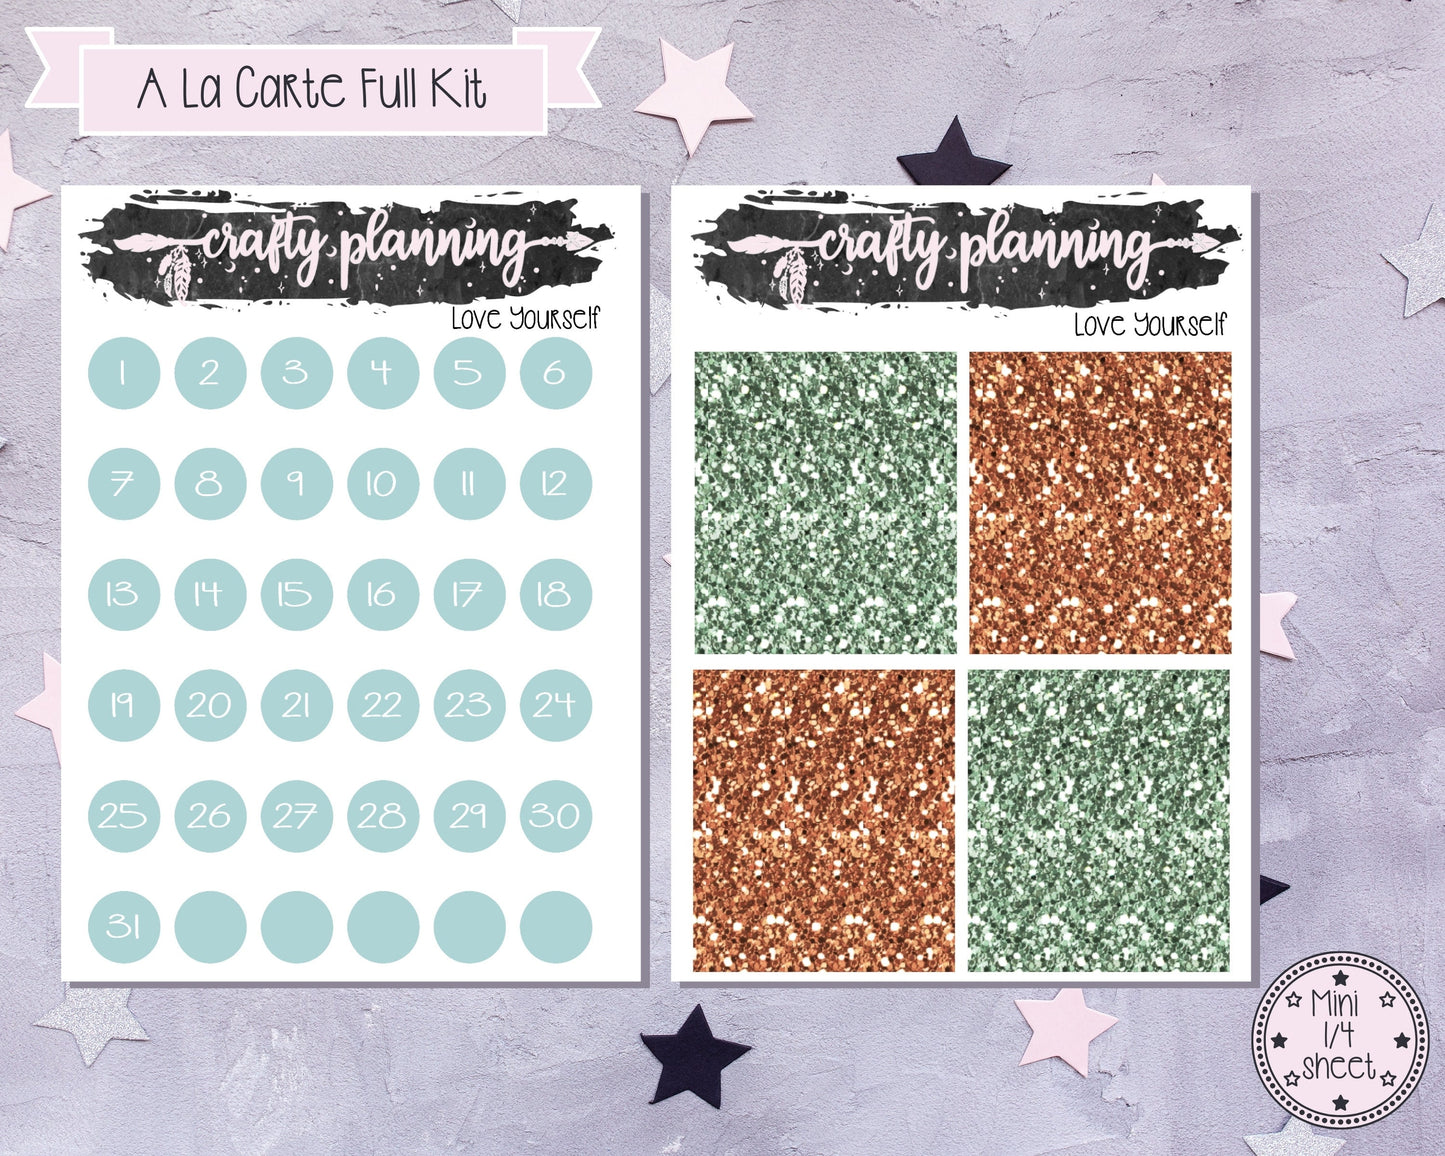 Love Yourself Weekly Planner Kit, Planner Stickers, Self Care Planner Kit, Positive Planner Kit, Standard Vertical, Deluxe Kit, A La Carte